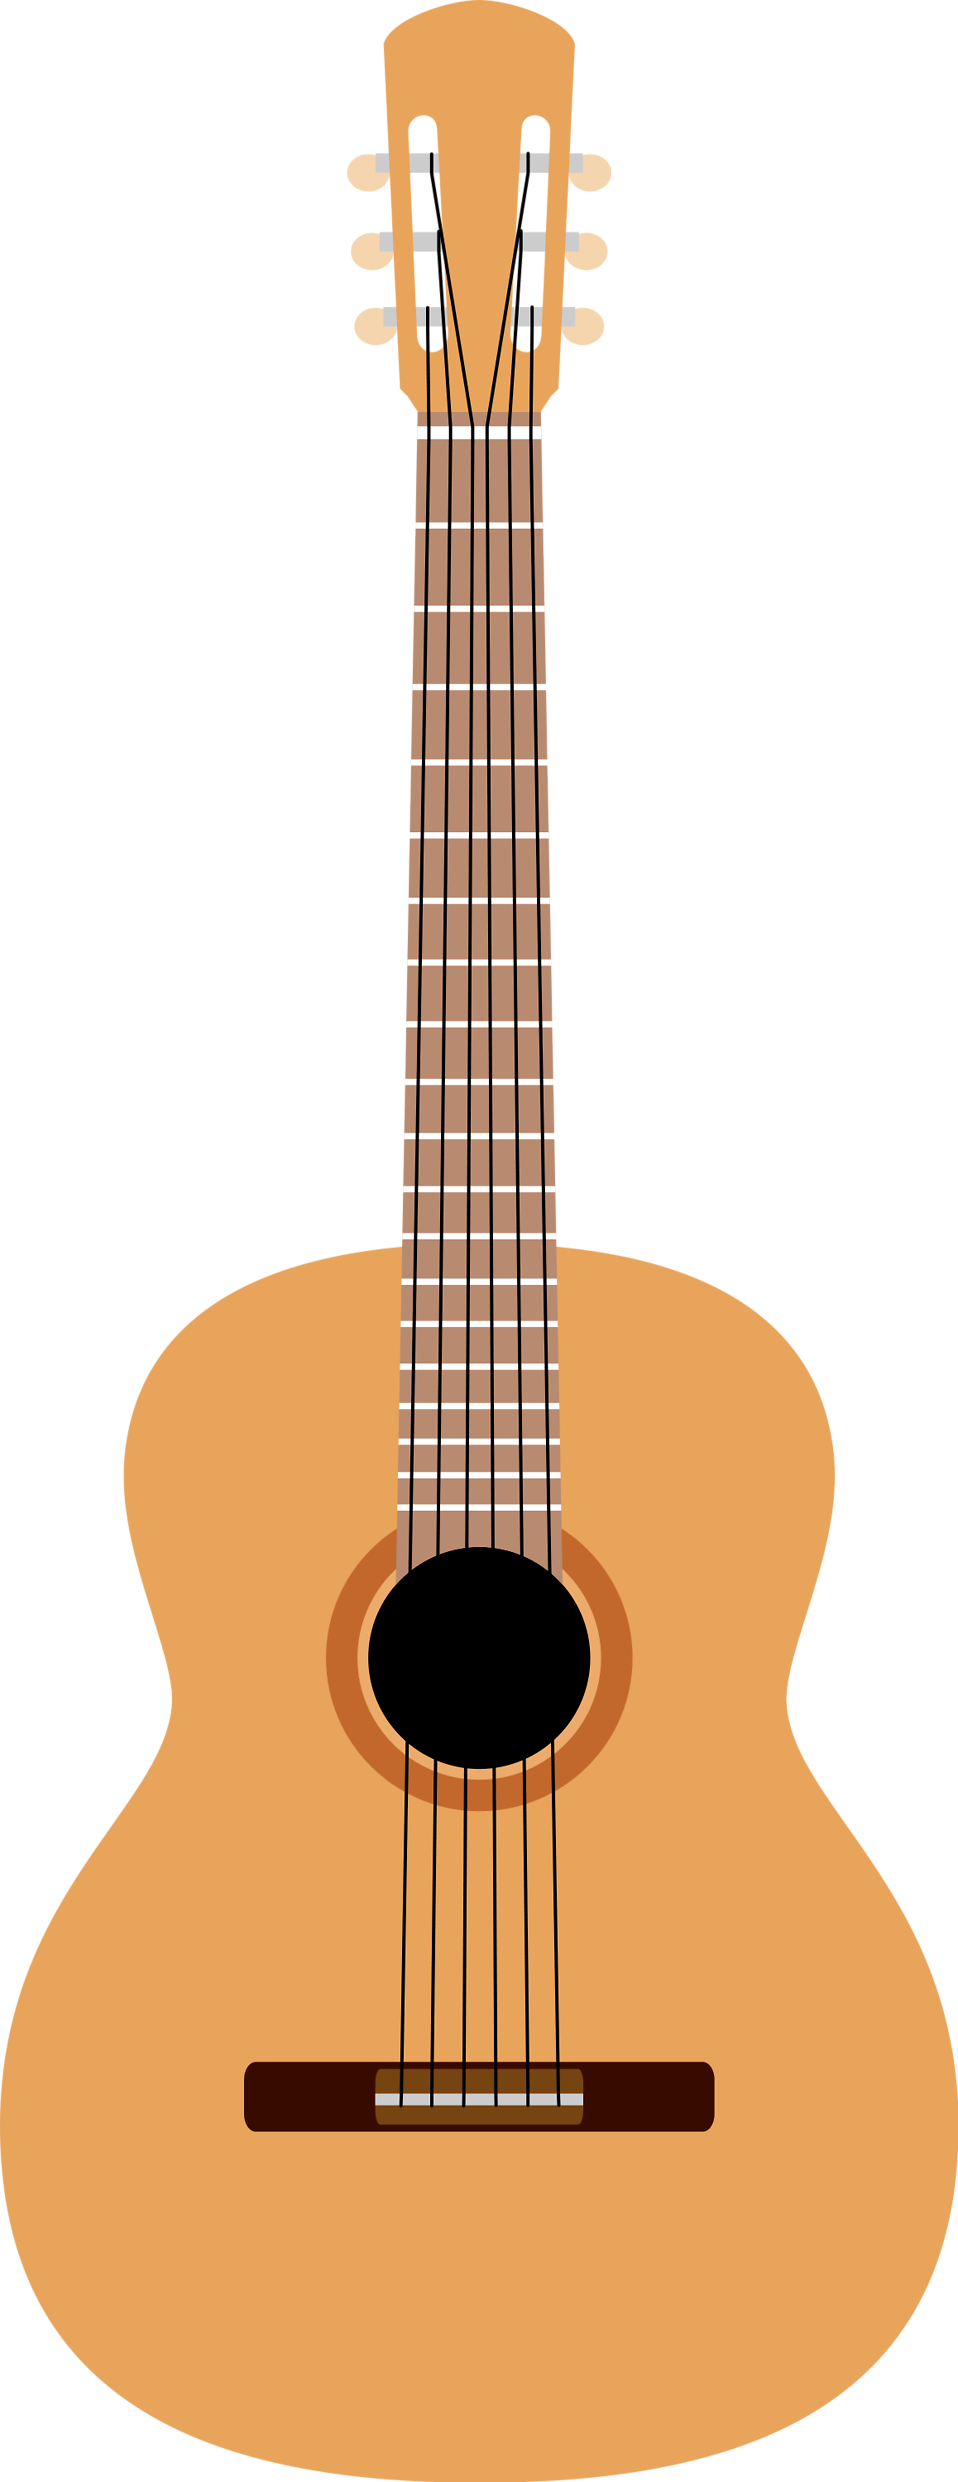 Acoustic guitar clipart - Clipground